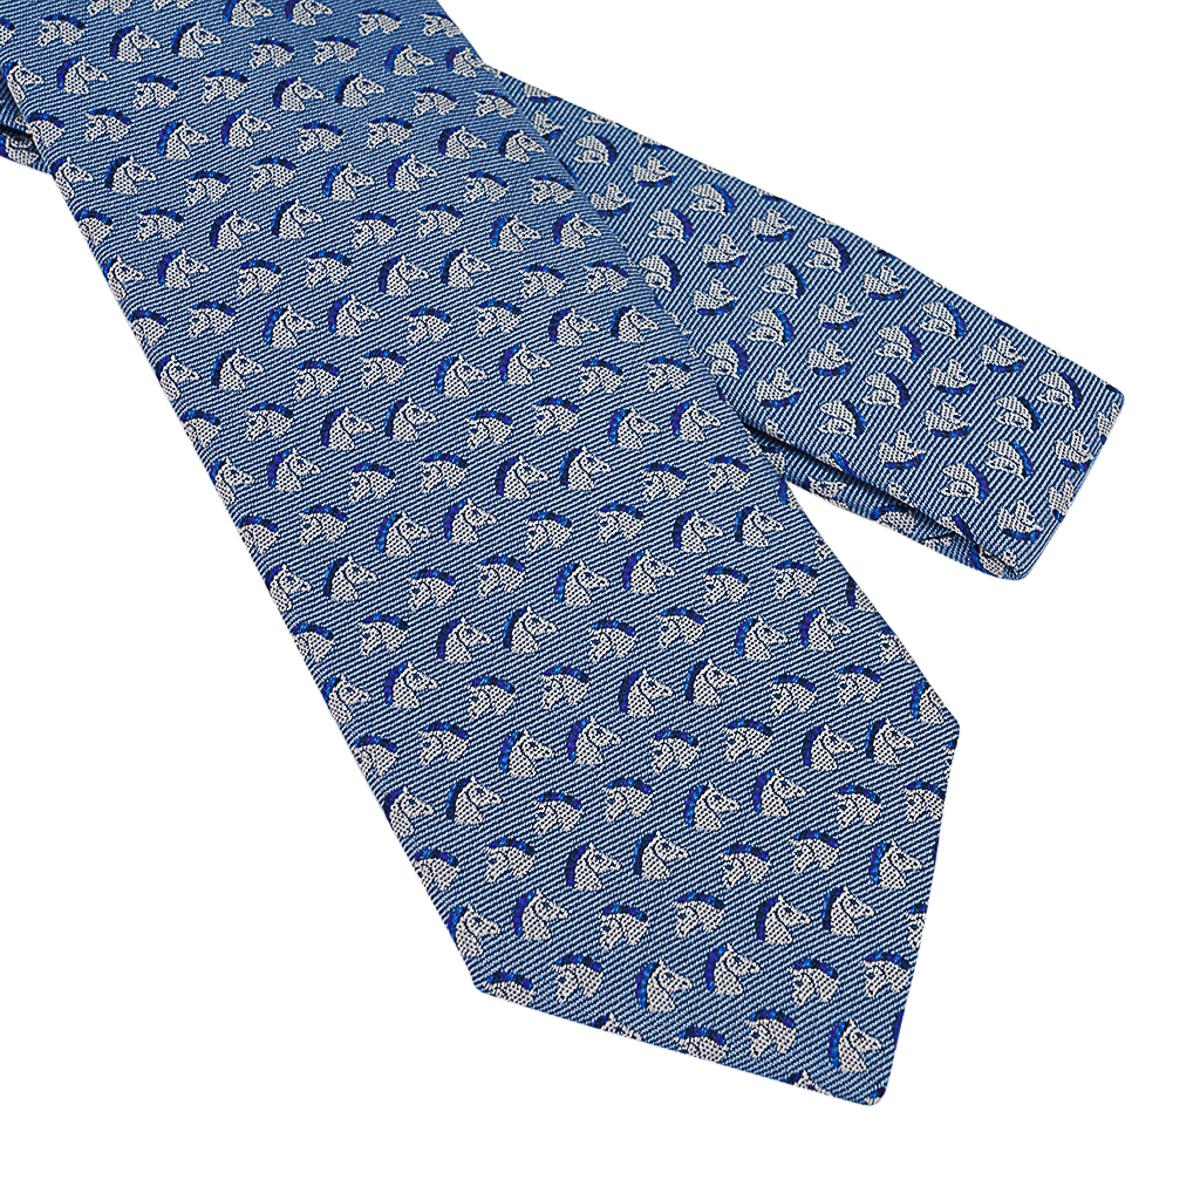 Mightychic offers an Hermes Tie 7 Cheval Rebelle featured in Ciel, Blanc and Marine colorway.
Hand sewn heavy silk twill.
Fun equestrian motif - Punk Mane!
Hand-sewn silk twill.
Made in France
NEW or NEVER WORN.
final sale

TIE MEASURES:
WIDTH 7